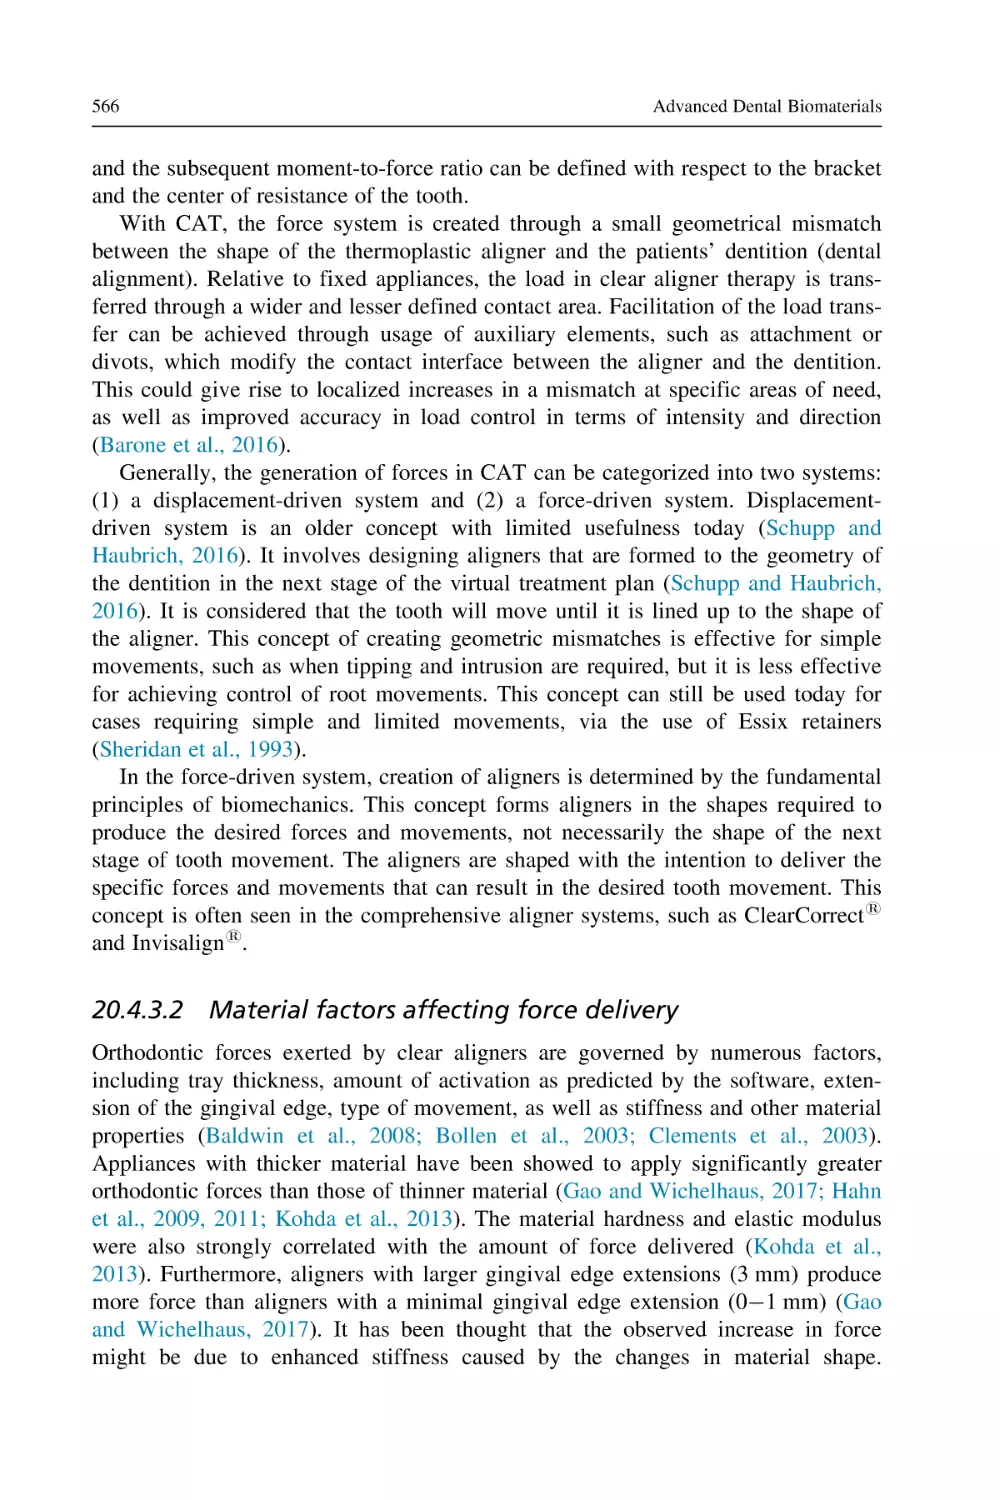 20.4.3.2 Material factors affecting force delivery